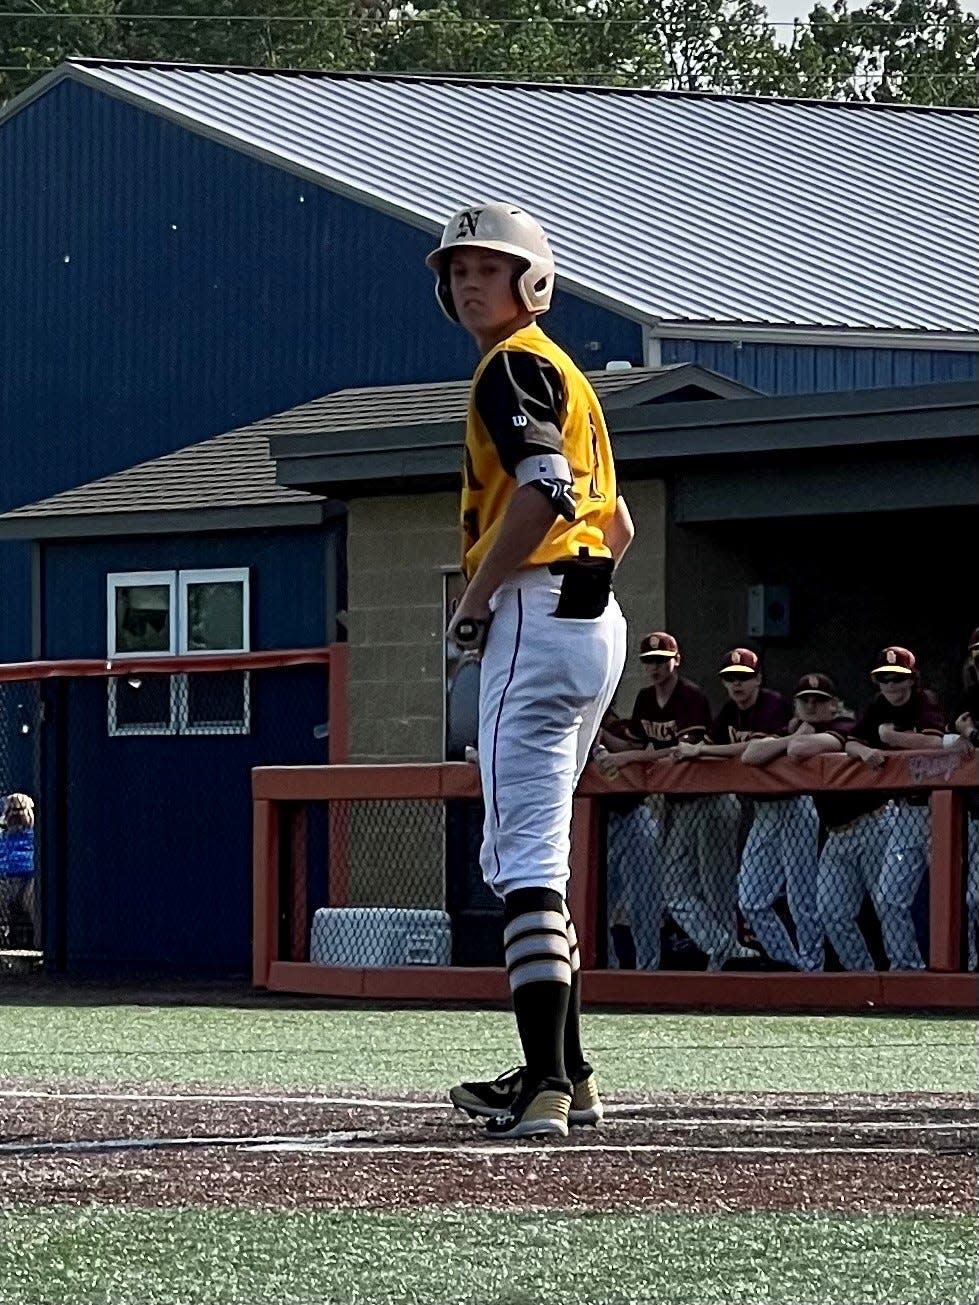 Northmor's Grant Bentley looks to the dugout during a Division IV district final baseball game at Olentangy Orange against Berne Union last year. Bentley was the Marion Star Baseball Pitcher of the Year a season ago.